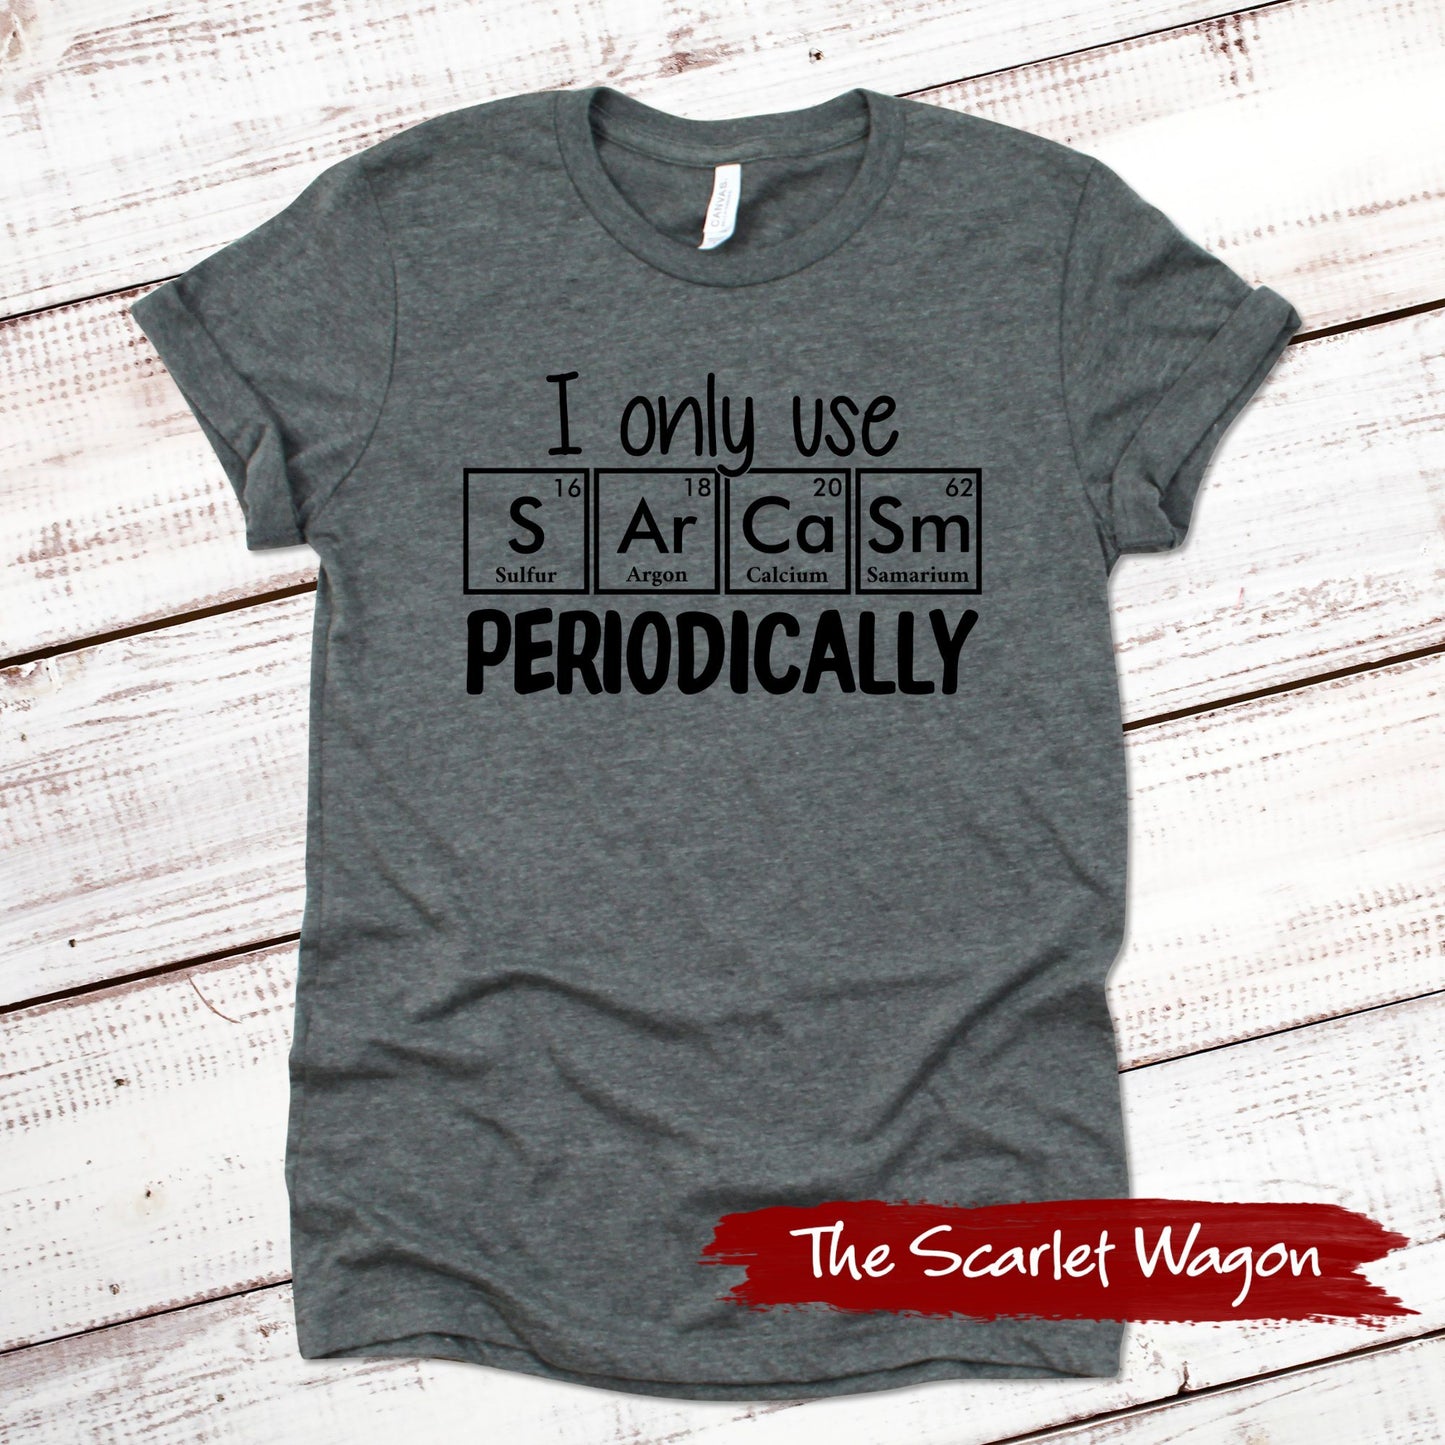 I Only Use Sarcasm Periodically Funny Shirt Scarlet Wagon Deep Heather Gray XS 